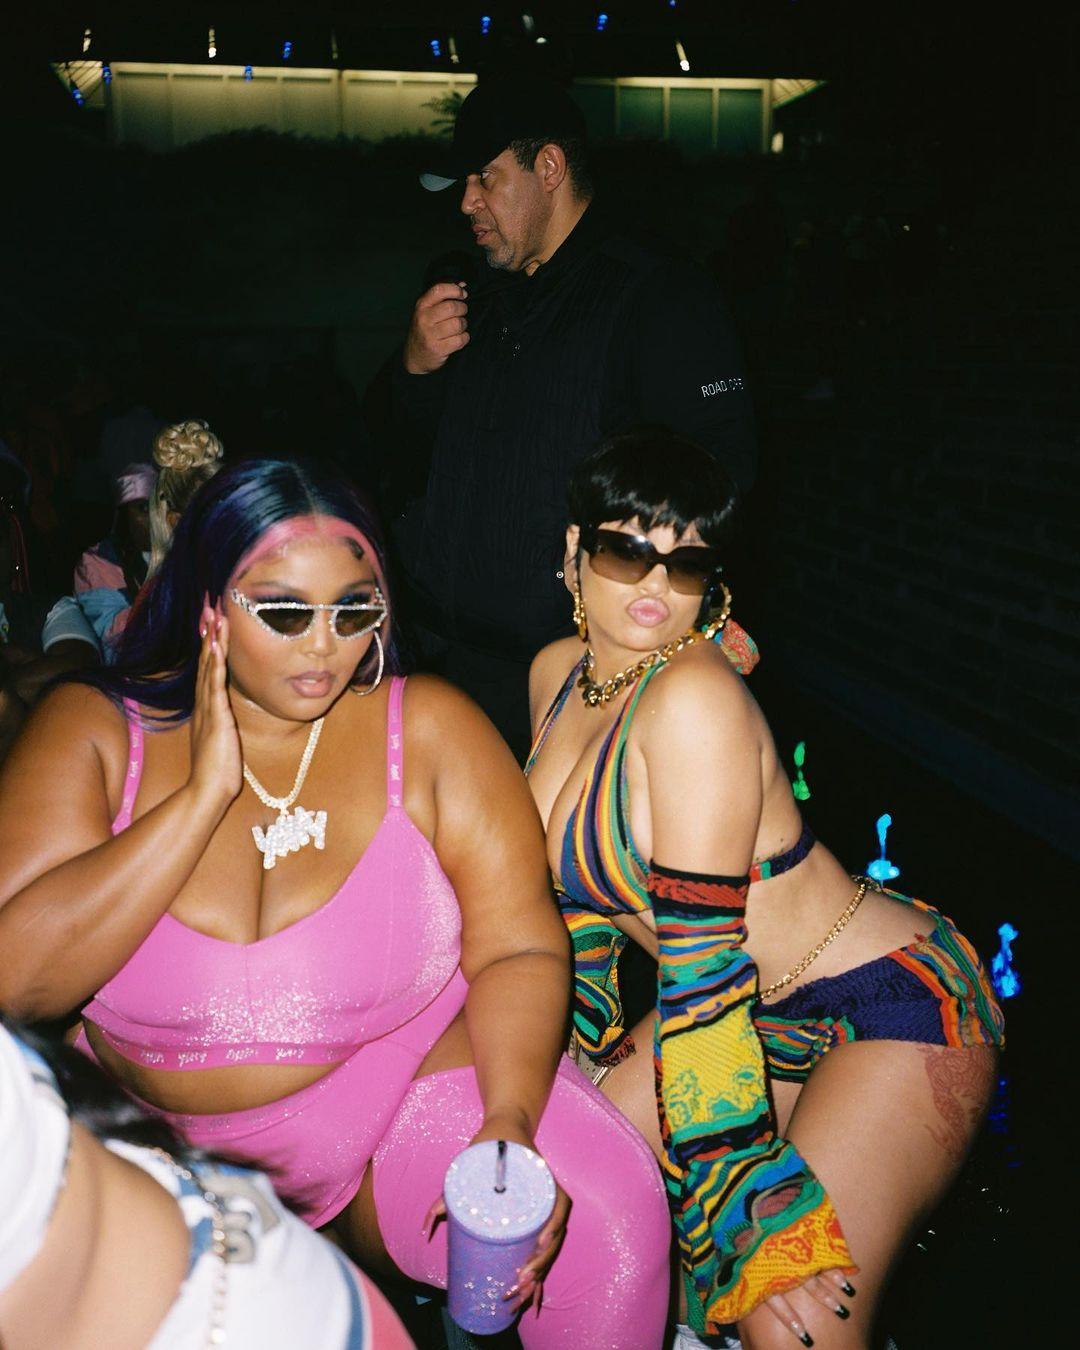 Lizzo Gets Freaky At 21 Savage Bday Party, Joins Other Celebs At The 'Freaknik'